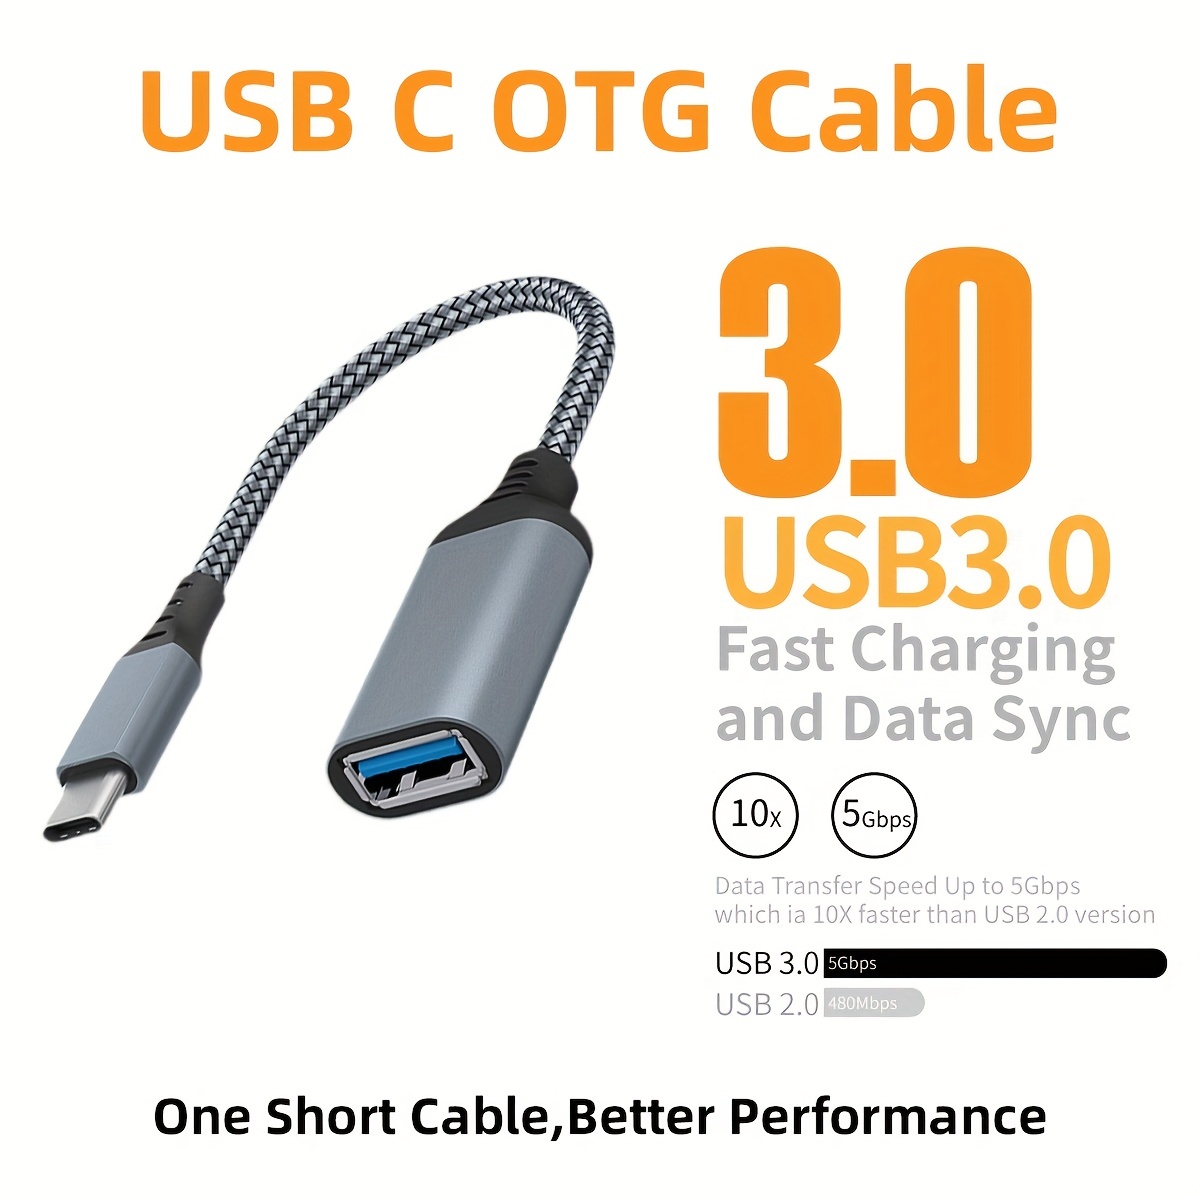  USB 2.0 A to USB A Male High-Speed 480 Mbps Cable Data